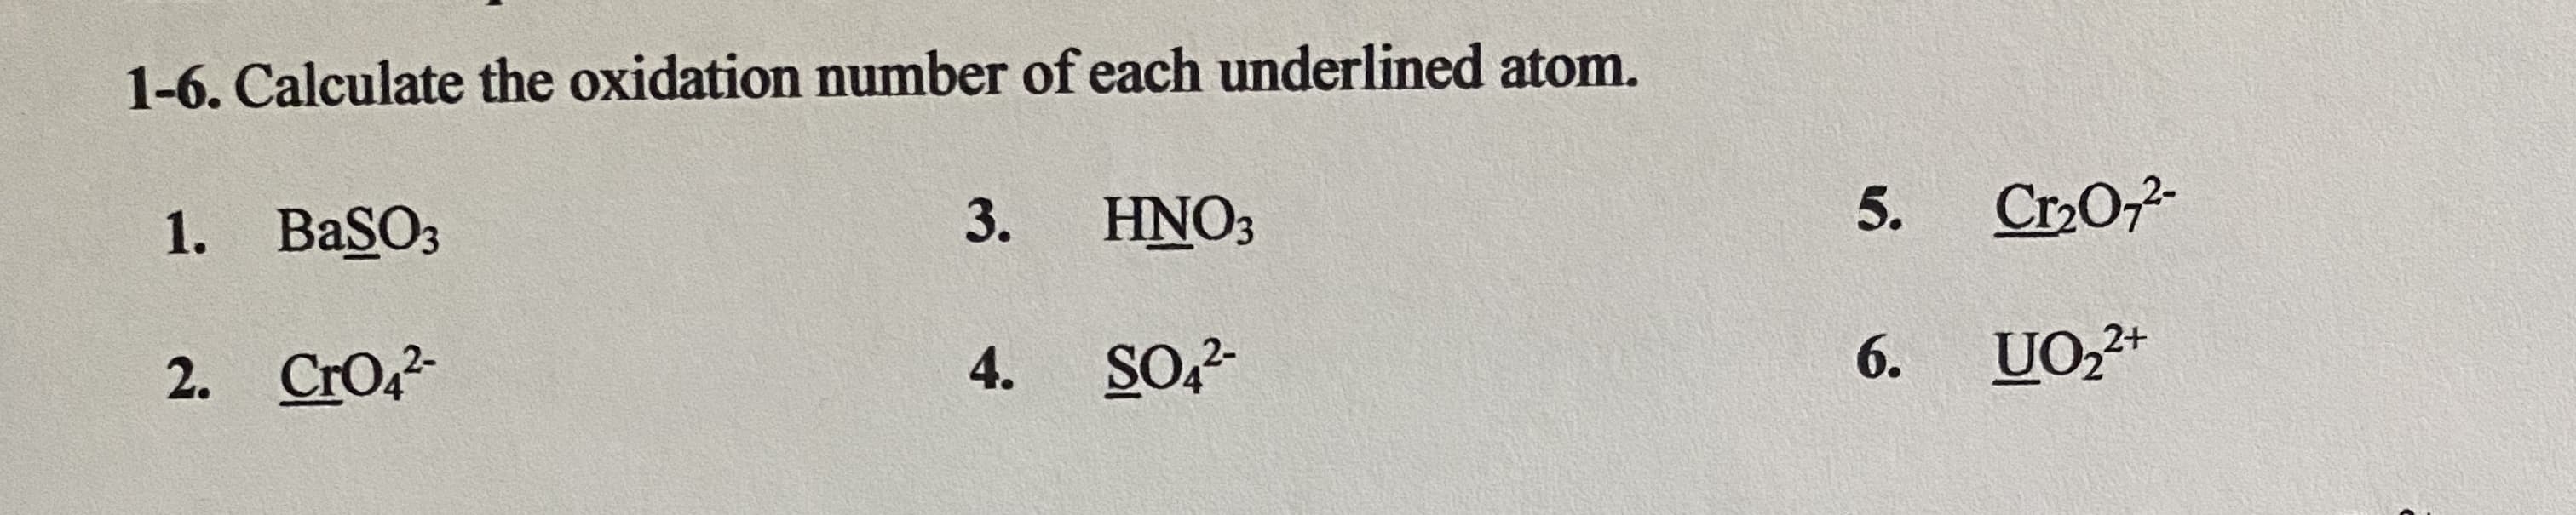 1-6. Calculate the oxidation number of each underlined atom.
1. BaSO3
3.
HNO3
5.
Cr02-
2+
2. CrO
4.
SO2-
6.
